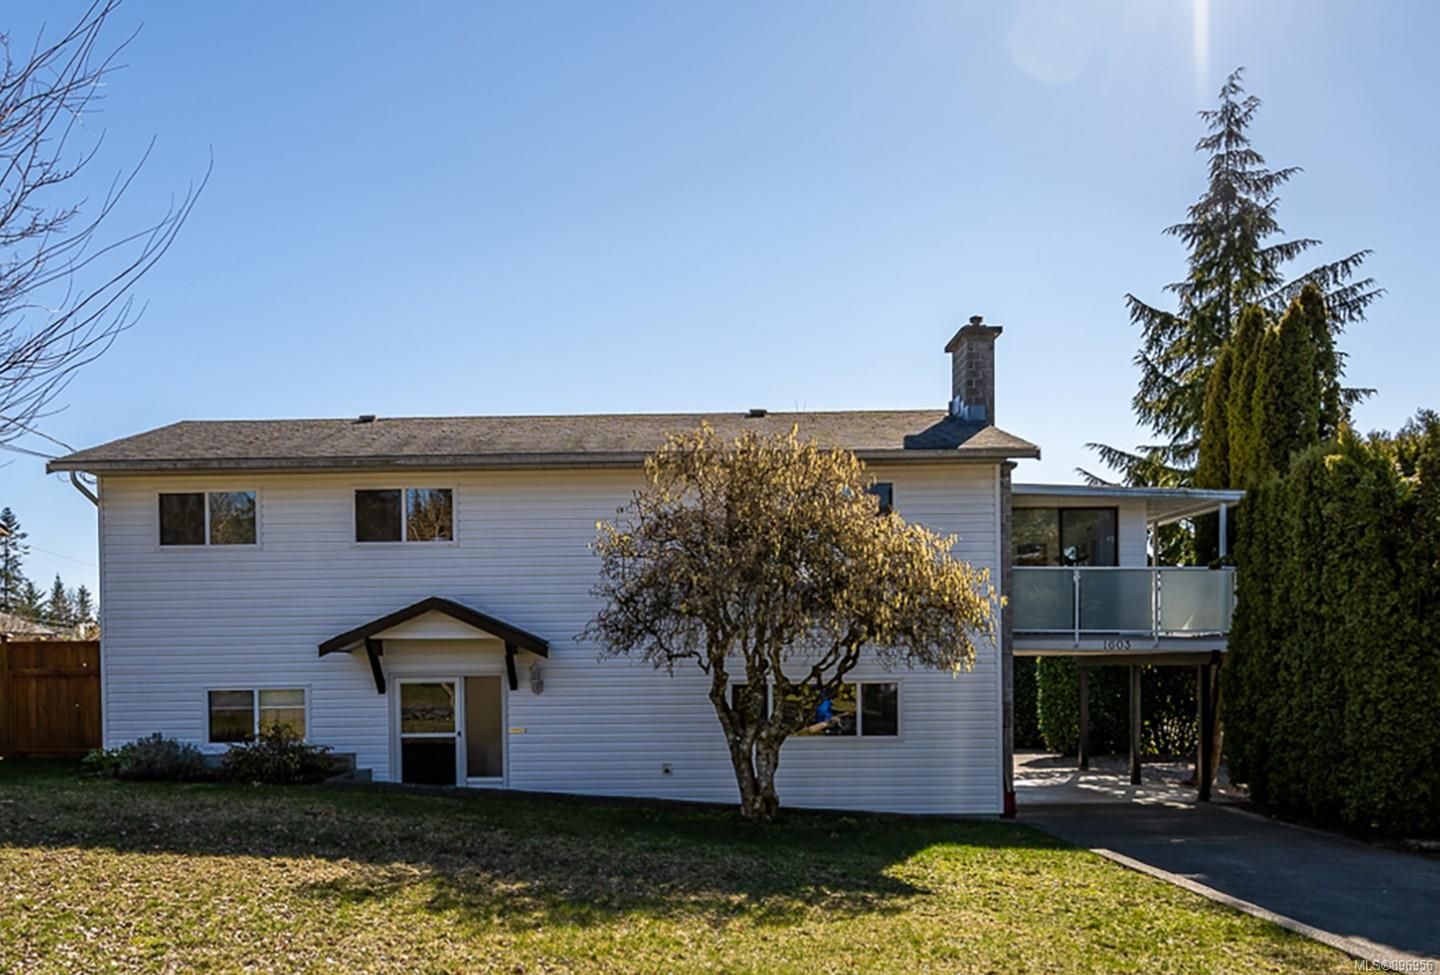 I have sold a property at 1603 Maquinna Ave in Comox
